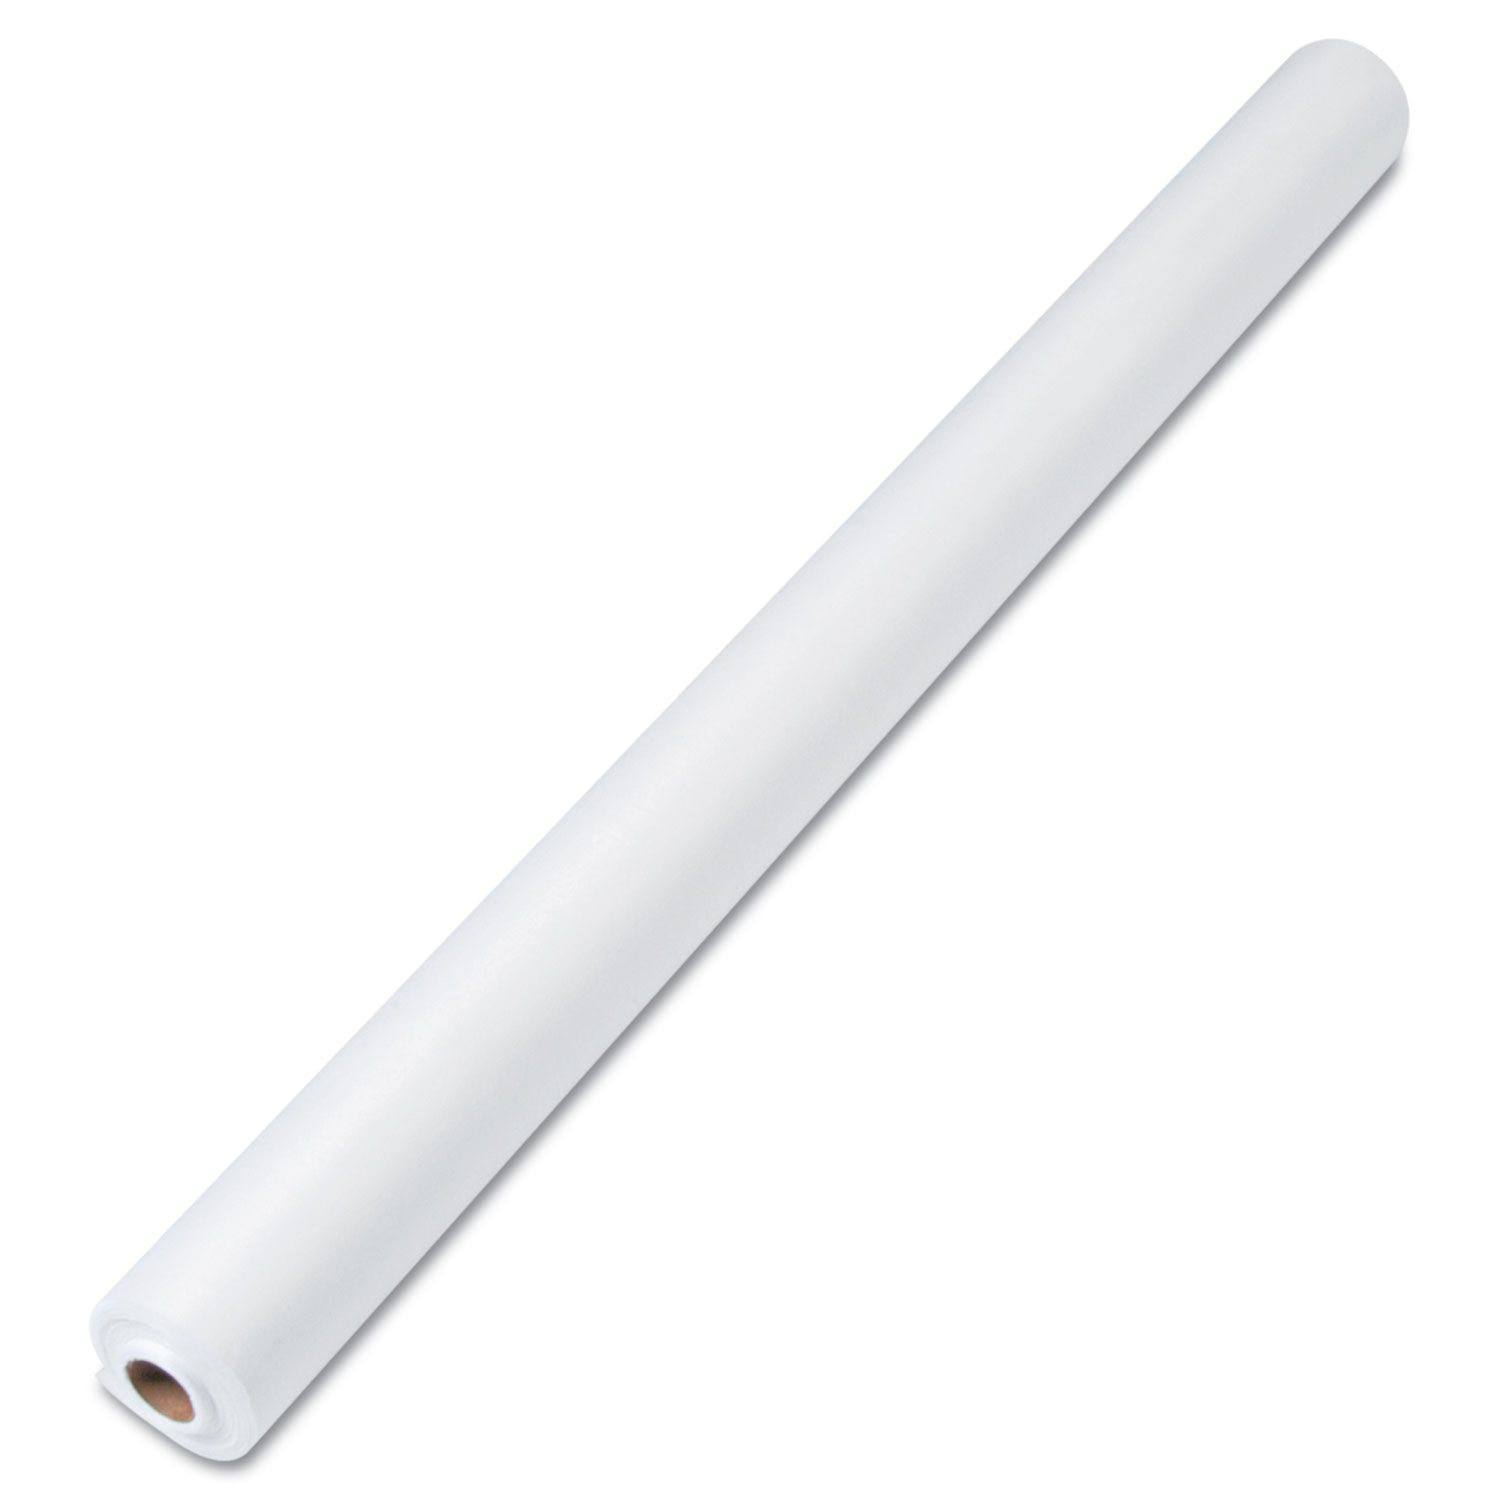  Tablemate LS4050WH Linen-Soft Non-Woven Polyester Banquet Roll, Cut-To-Fit, 40 x 50ft, White (TBLLS4050WH) 